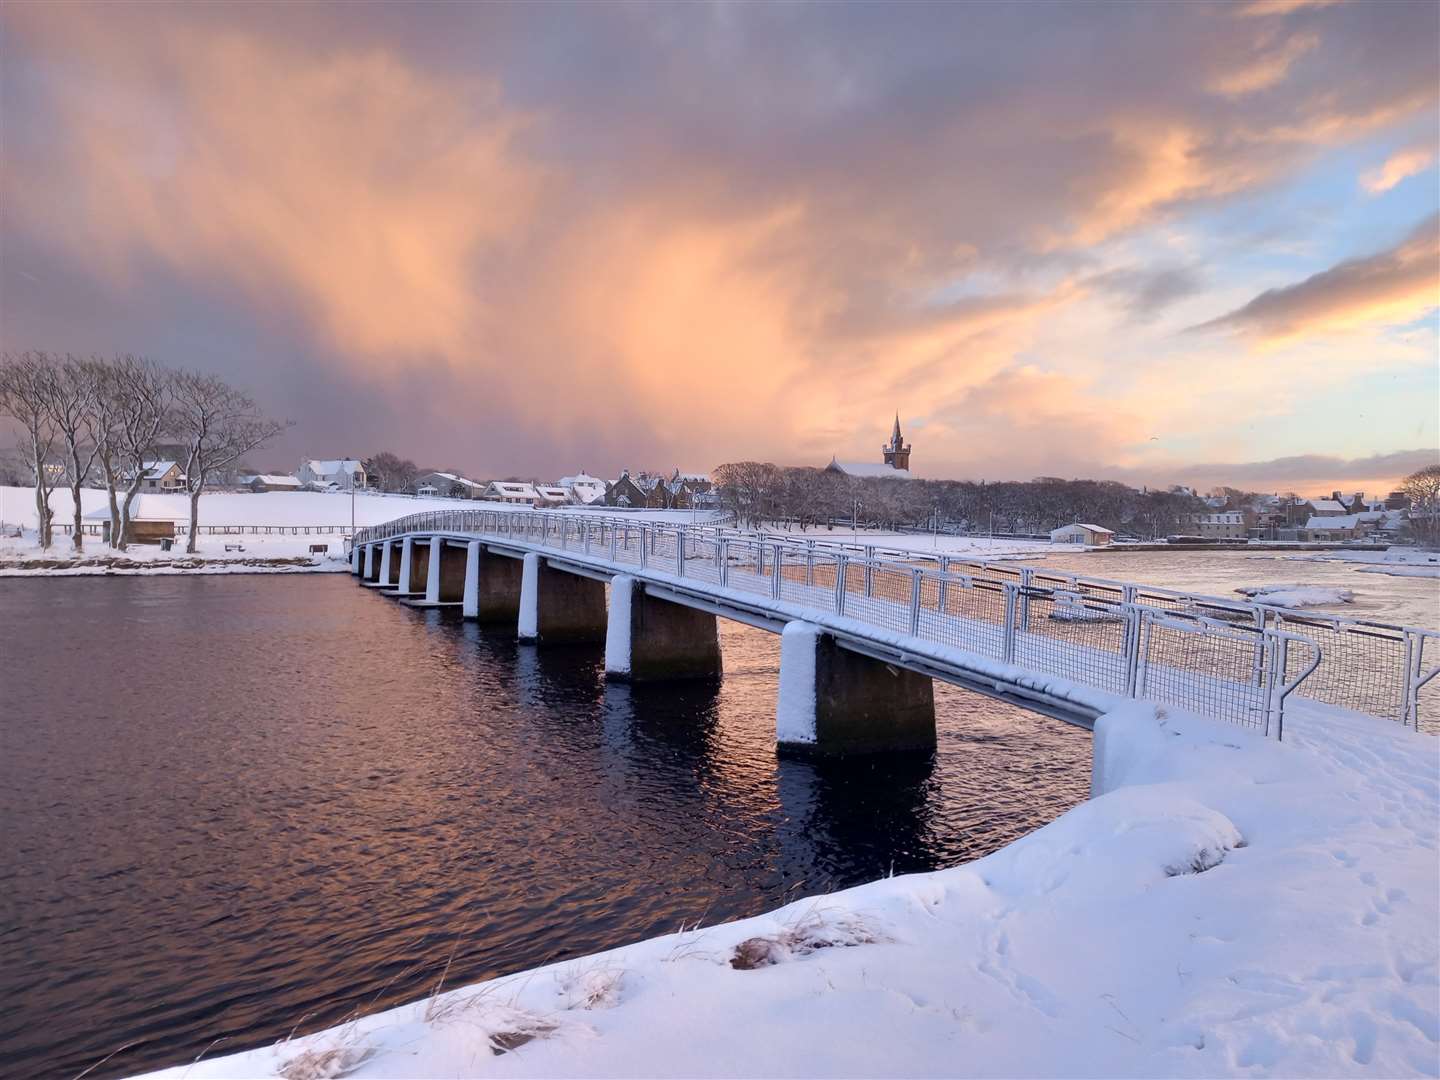 Derek Bremner sent this photo of the snow at Wick Riverside, looking over the Coghill Bridge.